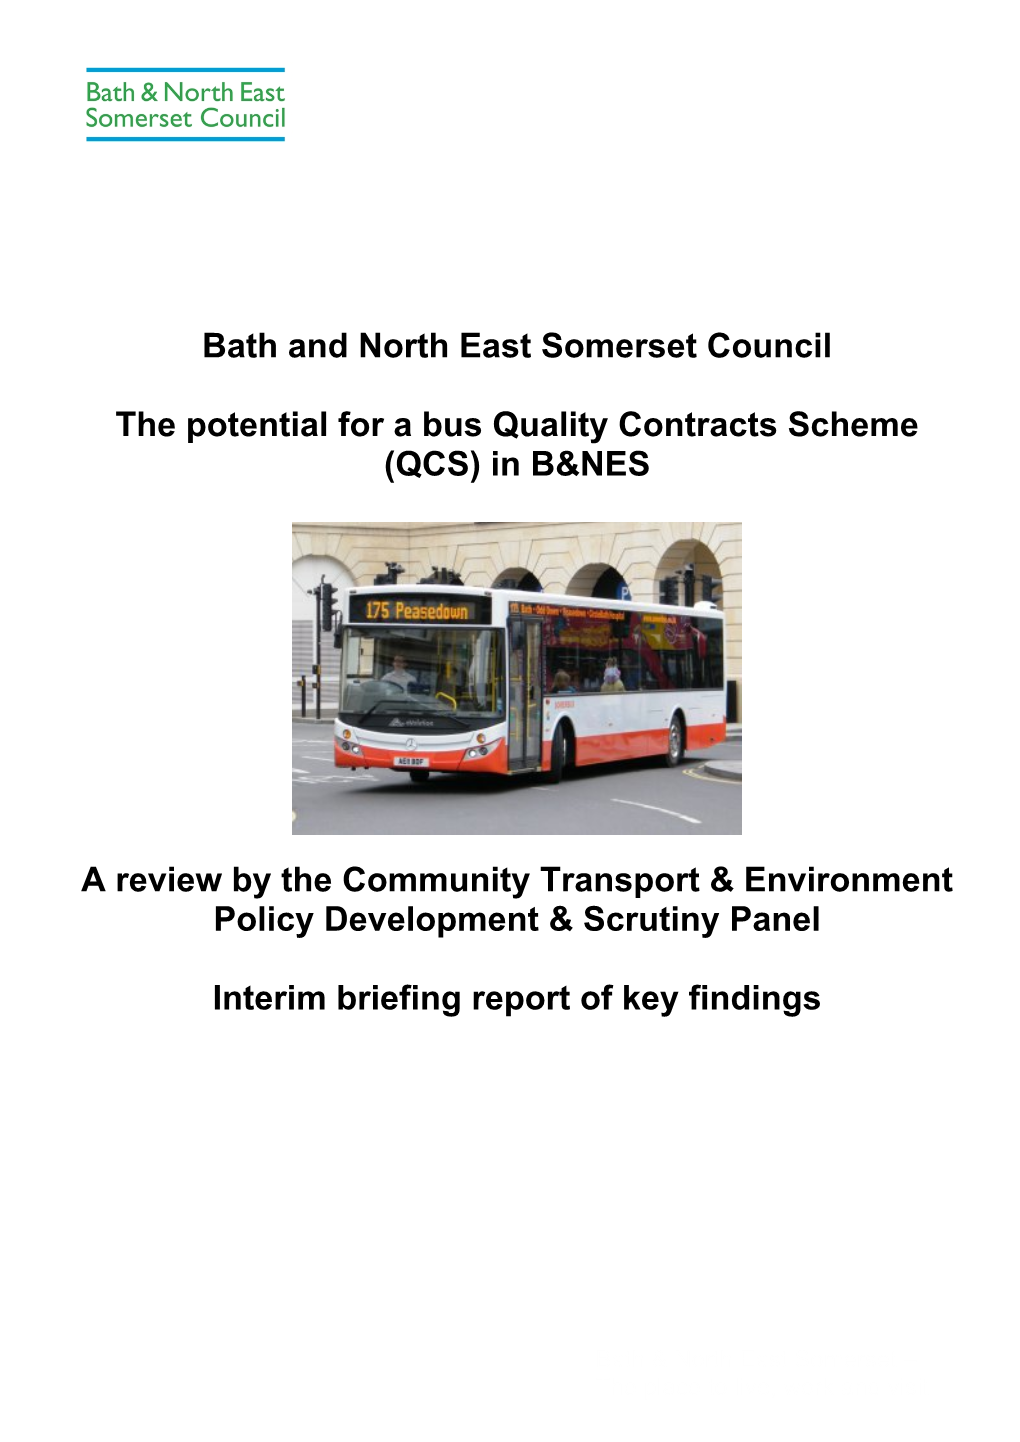 Bath and North East Somerset Council the Potential for a Bus Quality Contracts Scheme (QCS) in B&NES a Review by the Communi